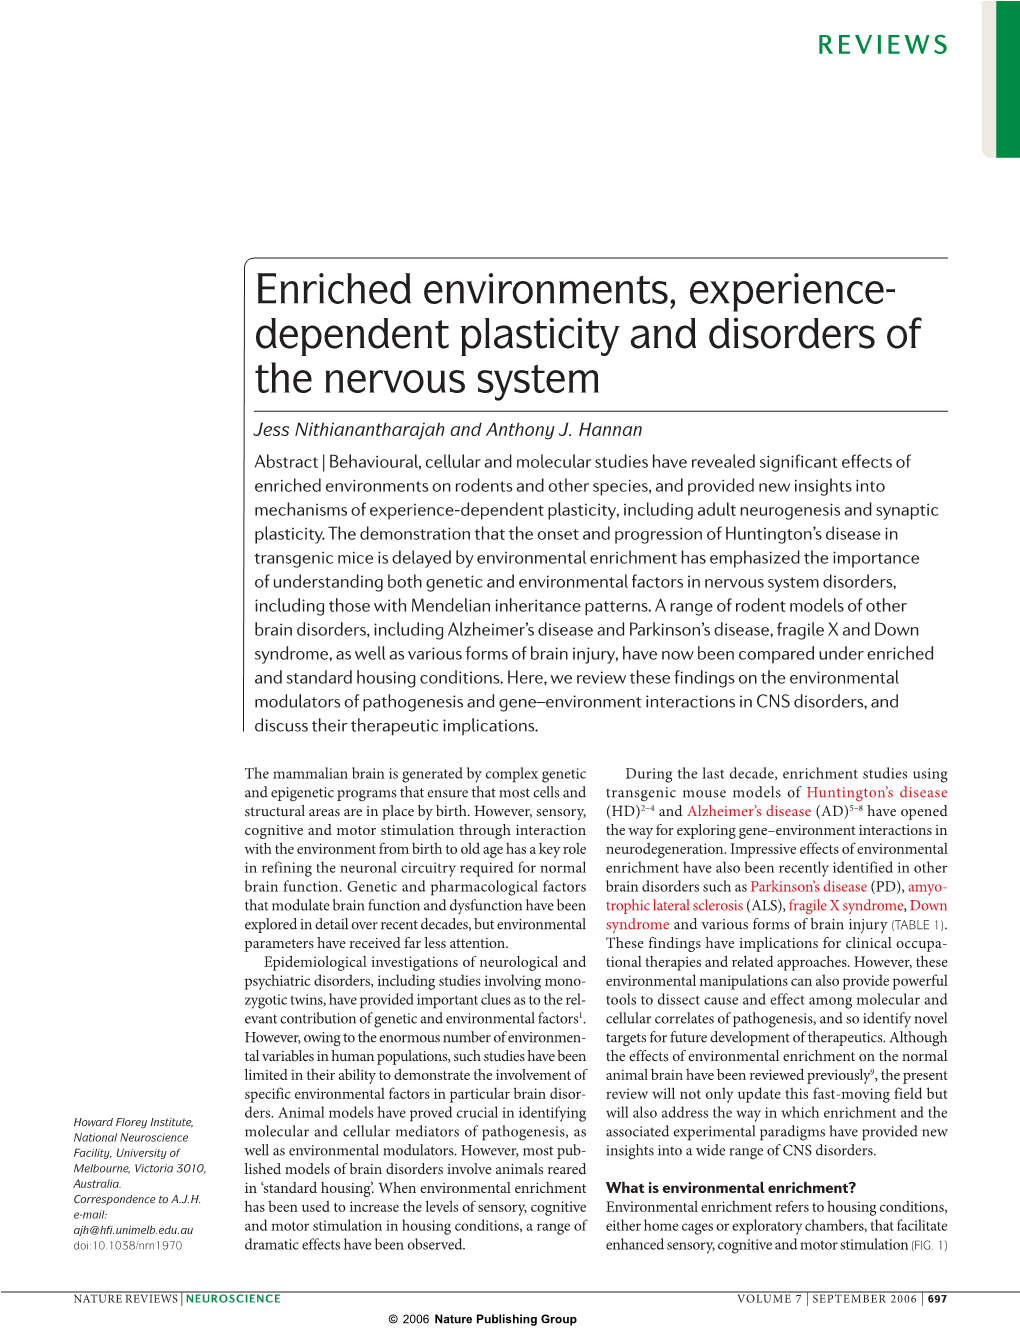 Enriched Environments, Experience- Dependent Plasticity and Disorders of the Nervous System